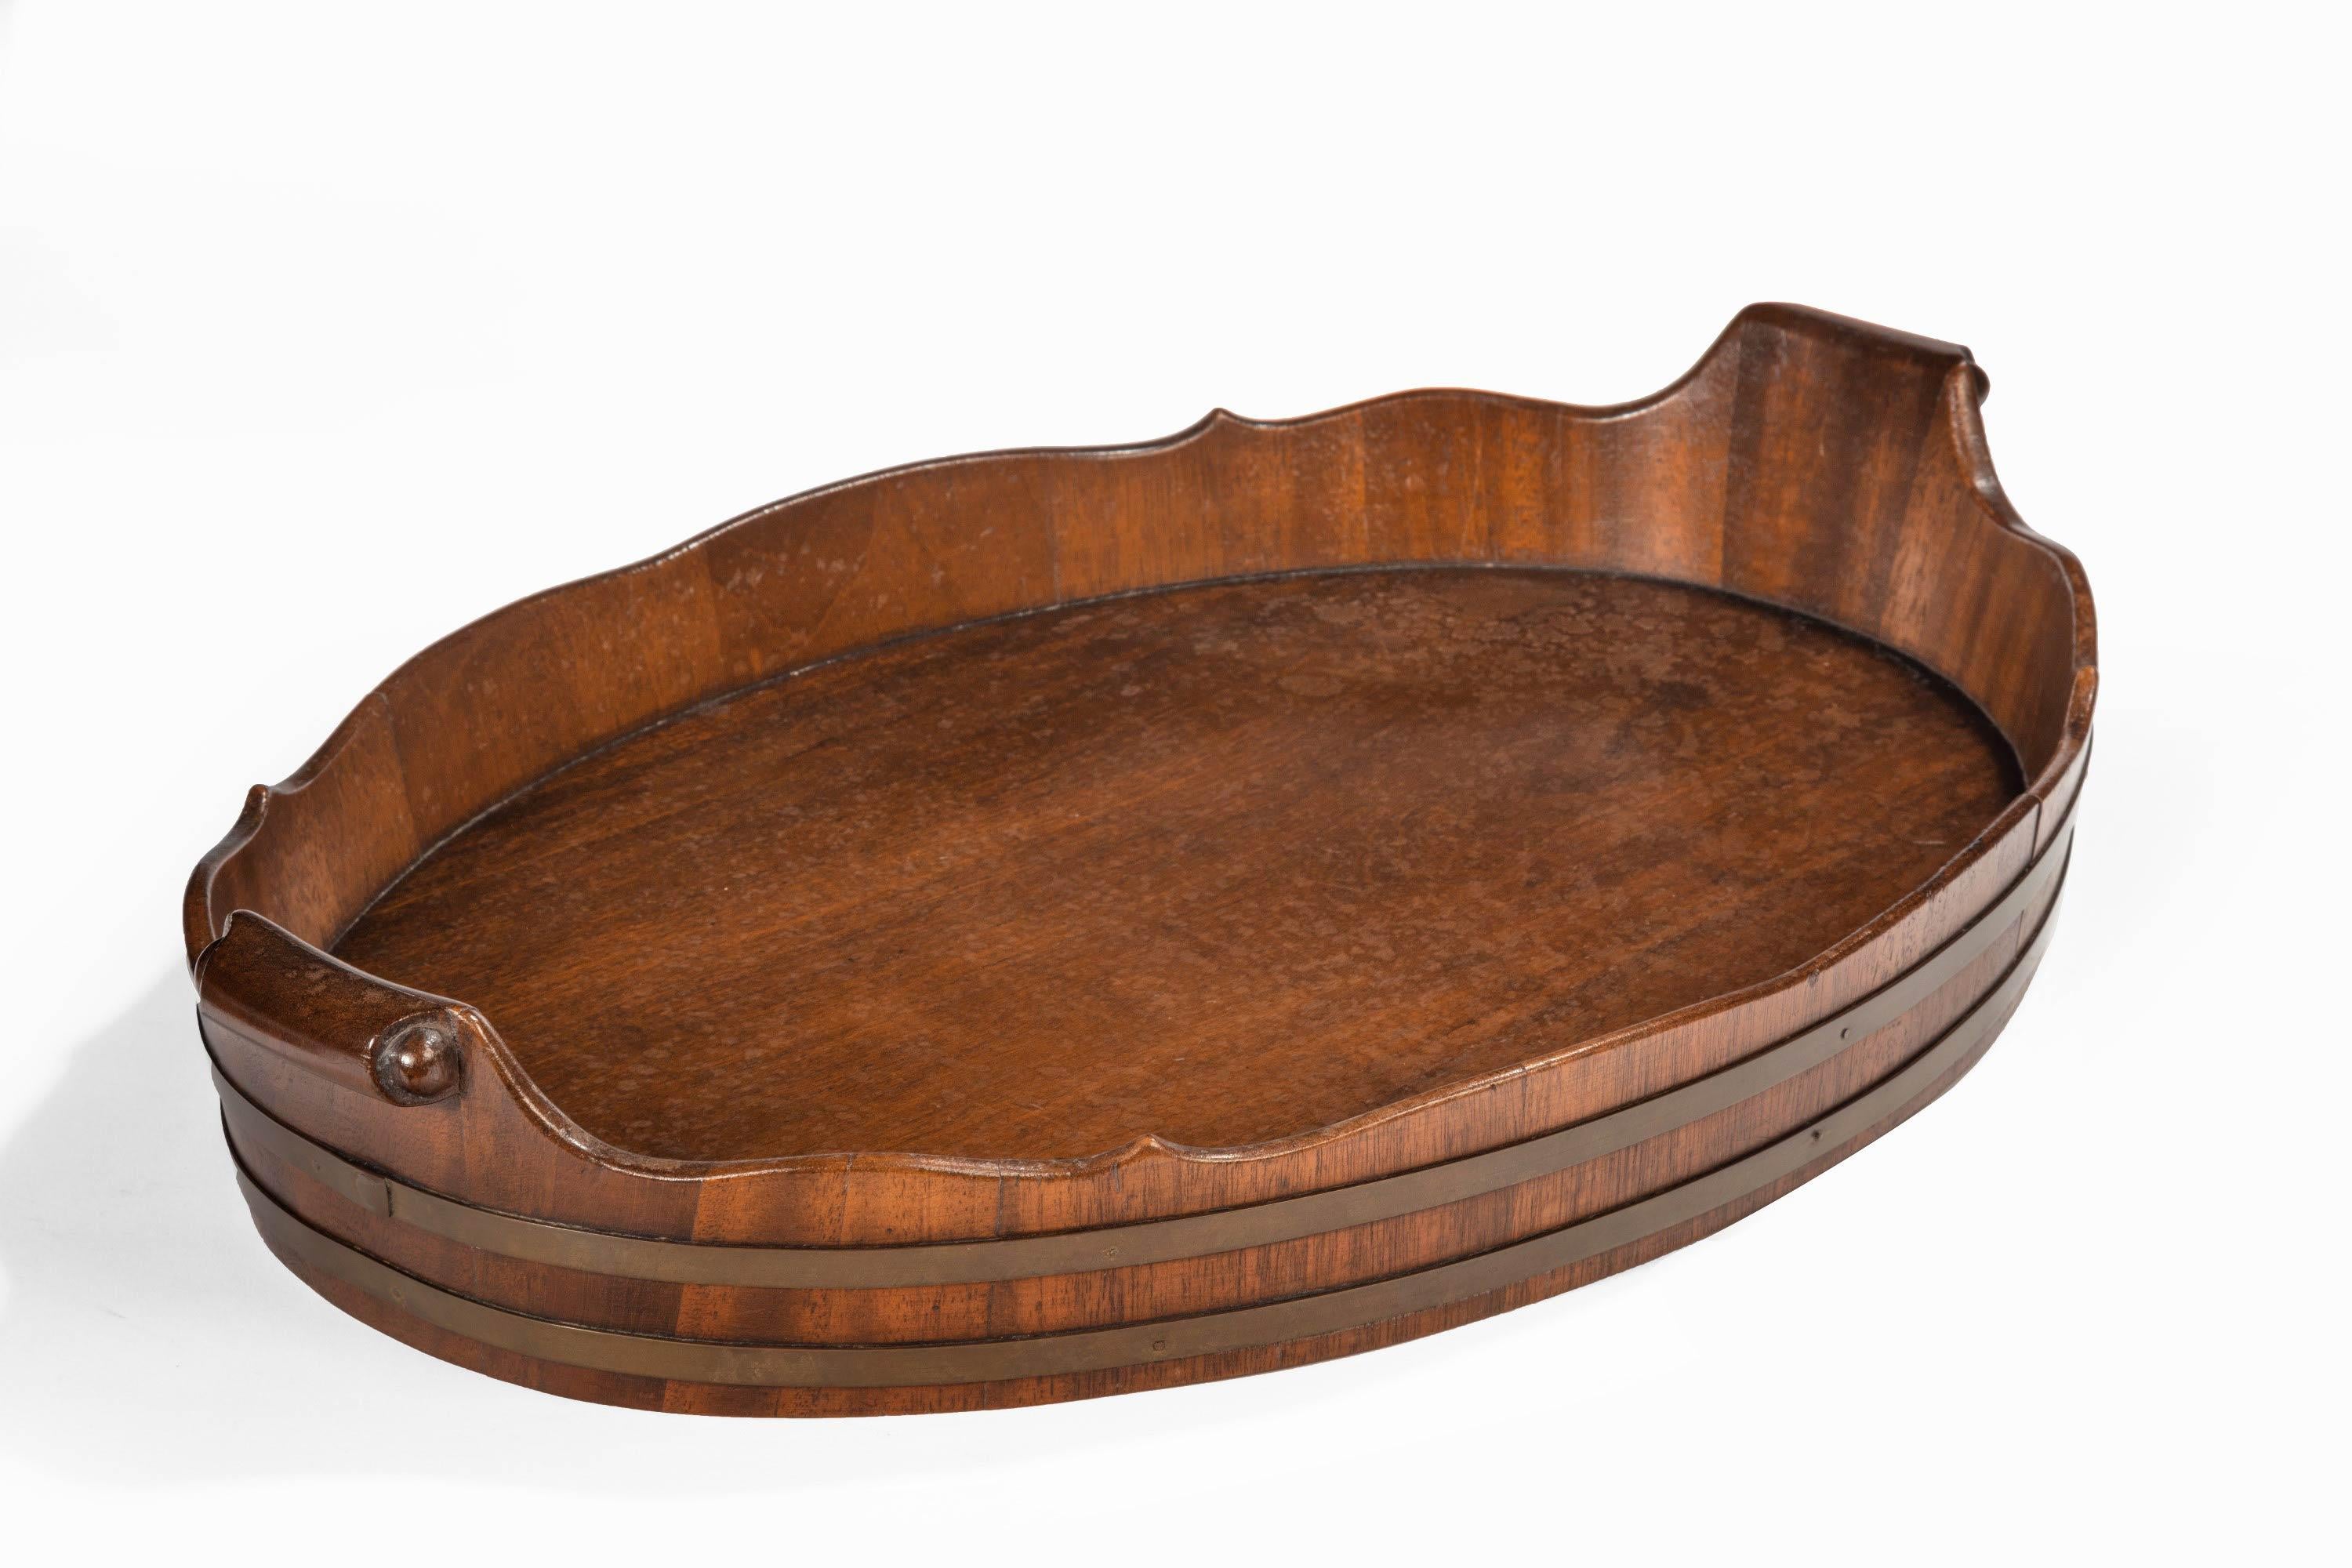 A very good George III period mahogany oval tray with an unusually deep border. Surmounted with two original brass bindings. Most attractive inlaid curled handles.